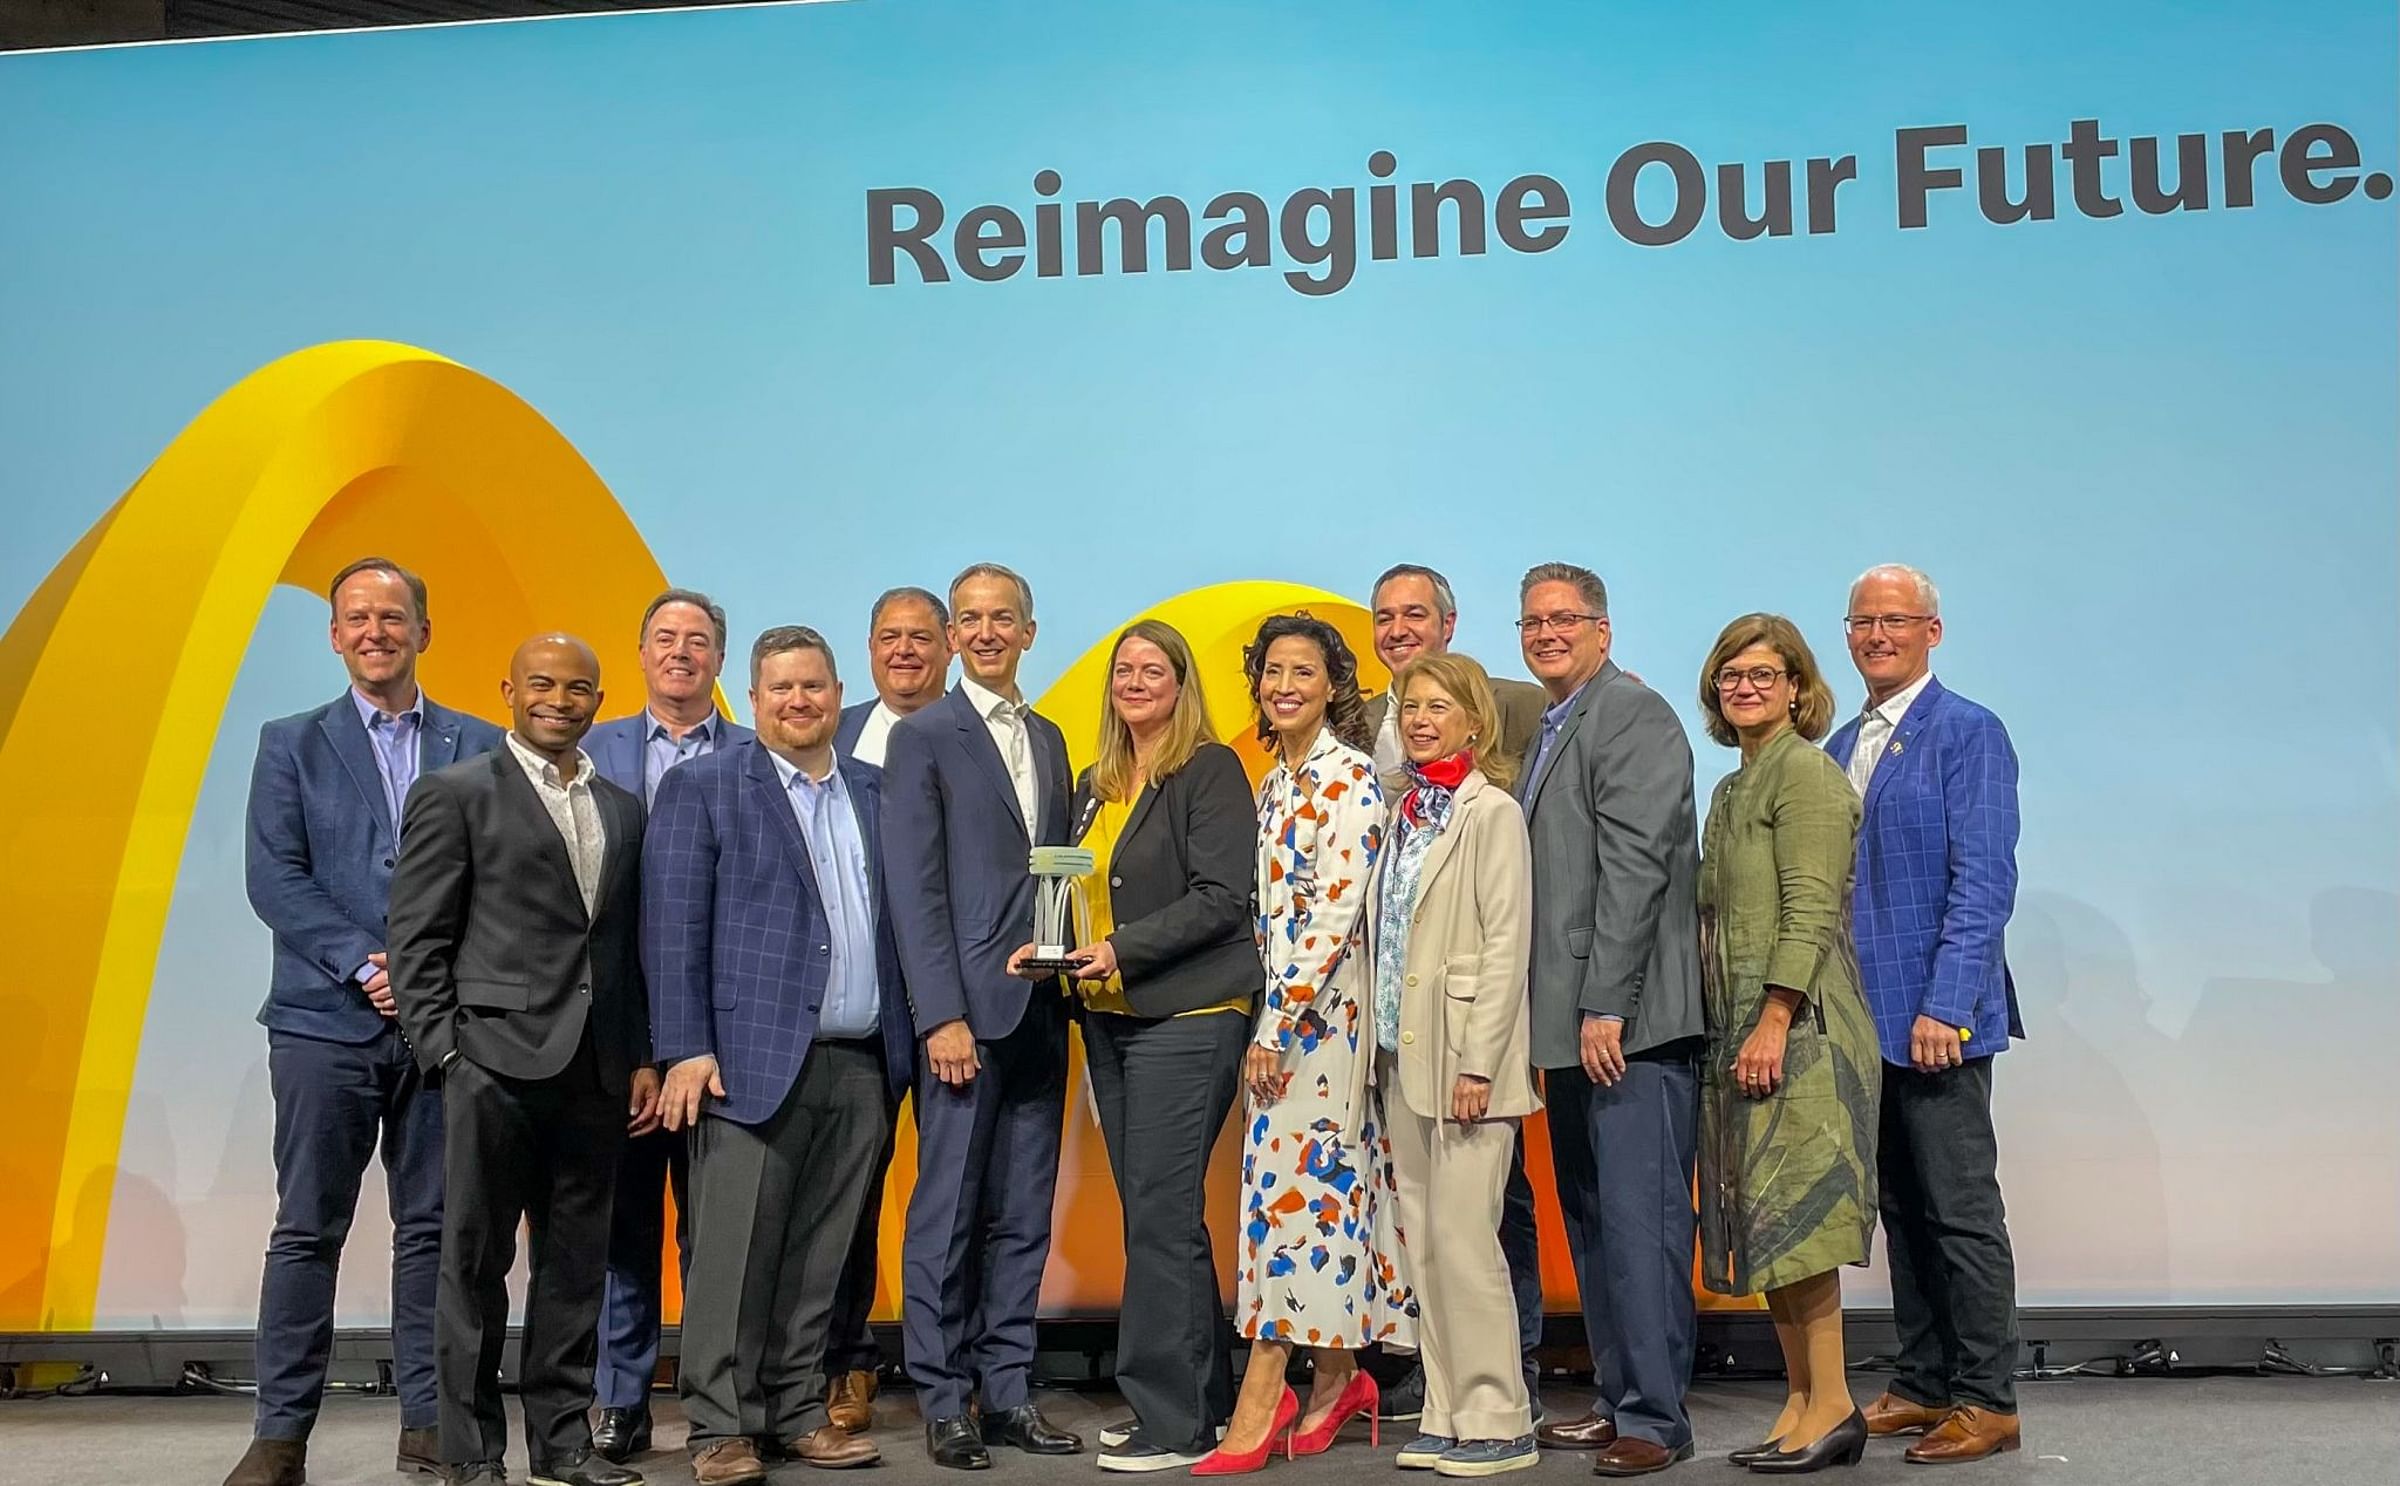 McCain Foods is McDonald's Global Supplier of the Year at the 2024 Worldwide Convention in Barcelona